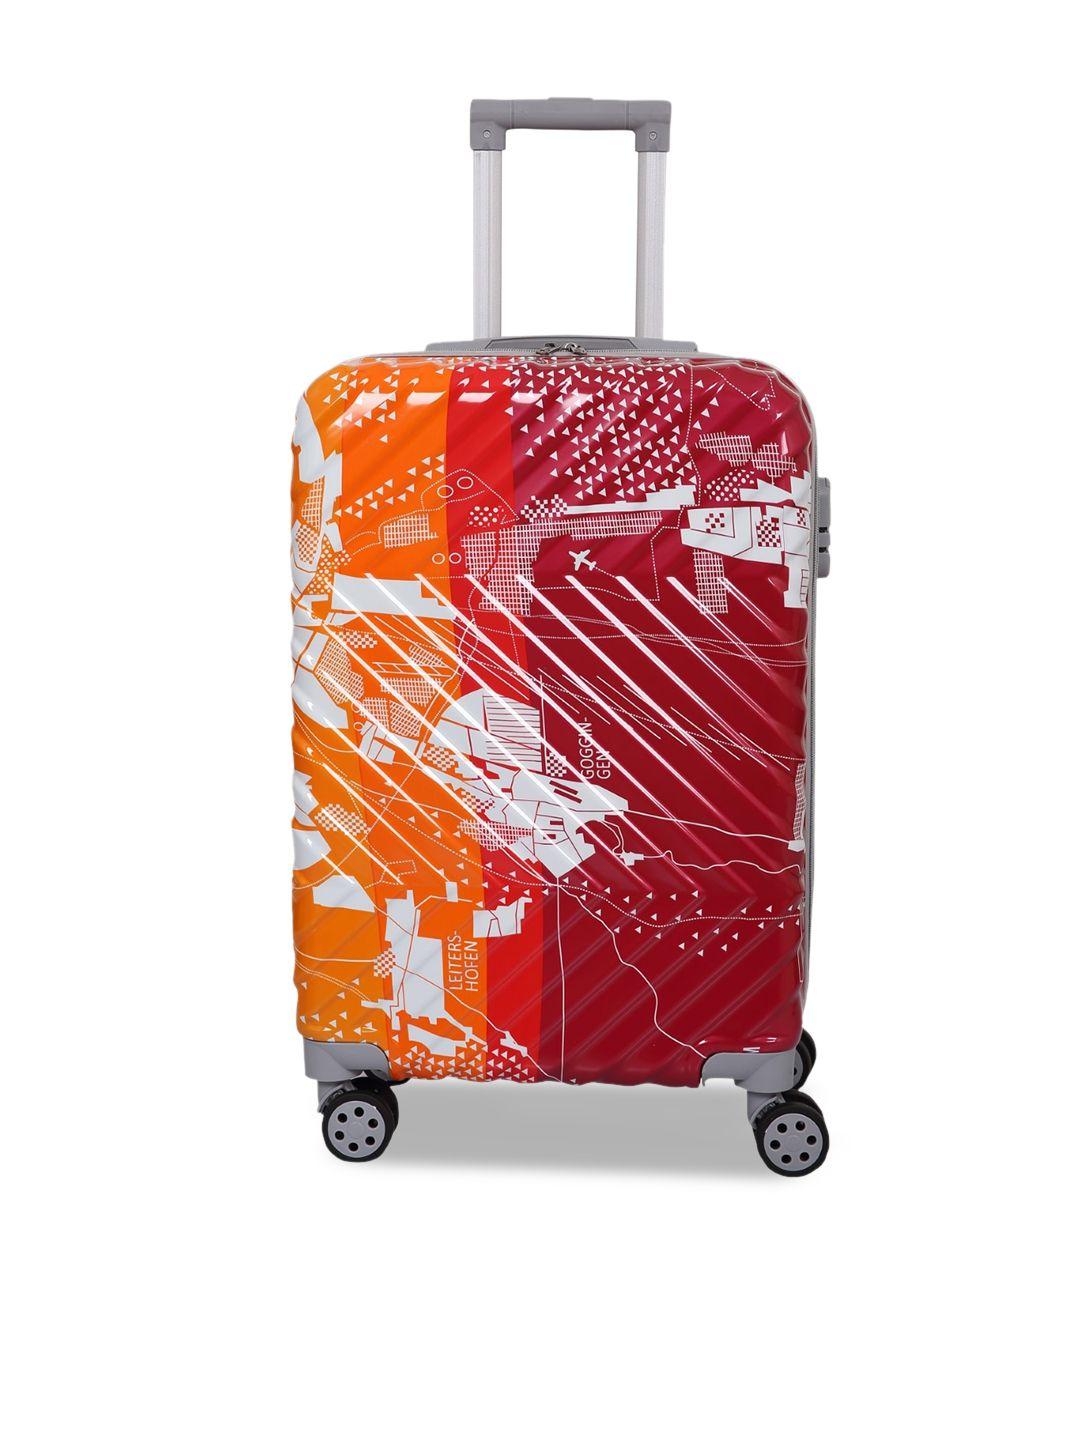 polo class red printed trolley bag 50 l